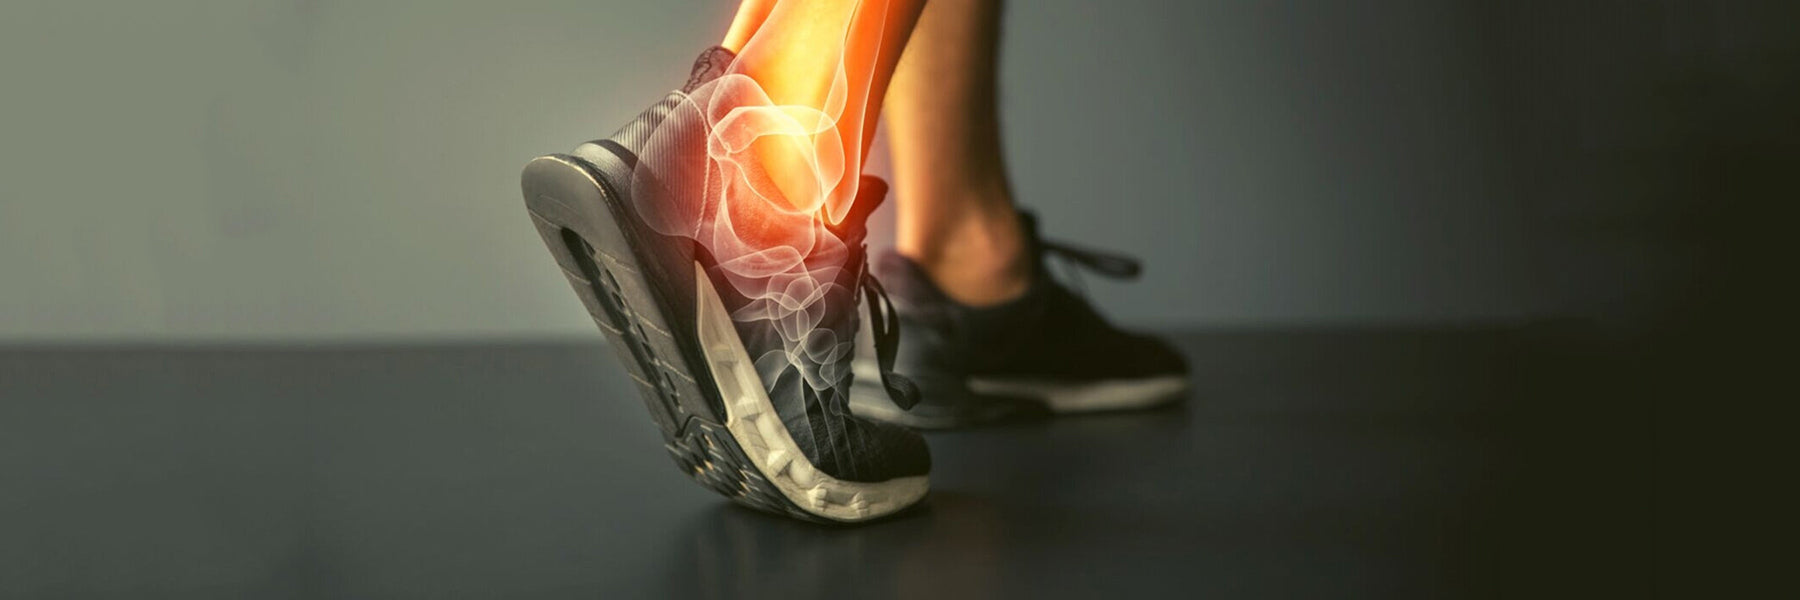 SPRAINED ANKLE TREATMENT TIPS